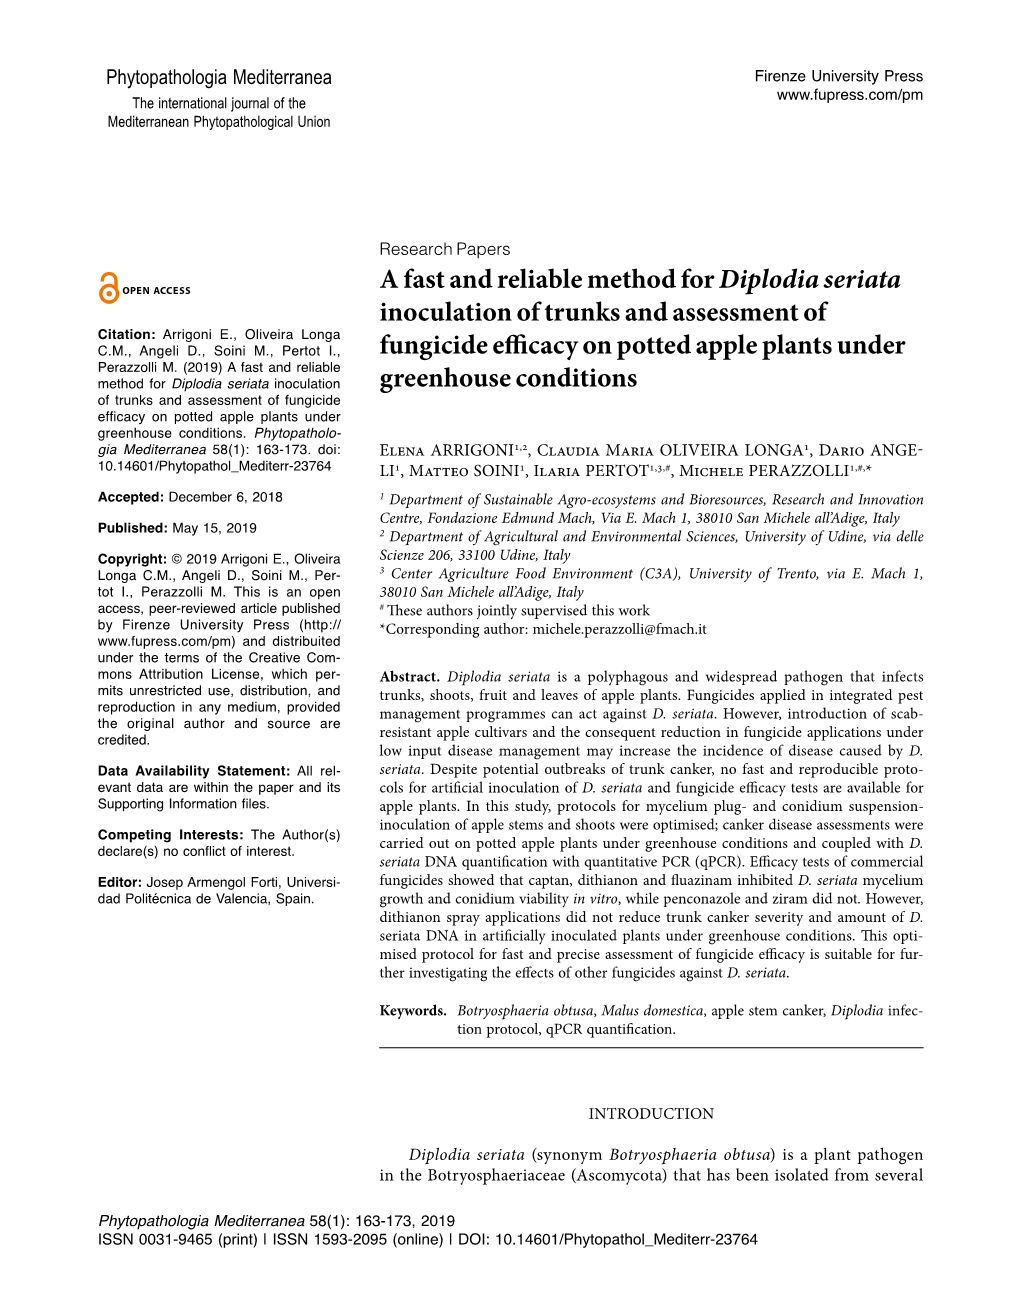 A Fast and Reliable Method for Diplodia Seriata Inoculation of Trunks And